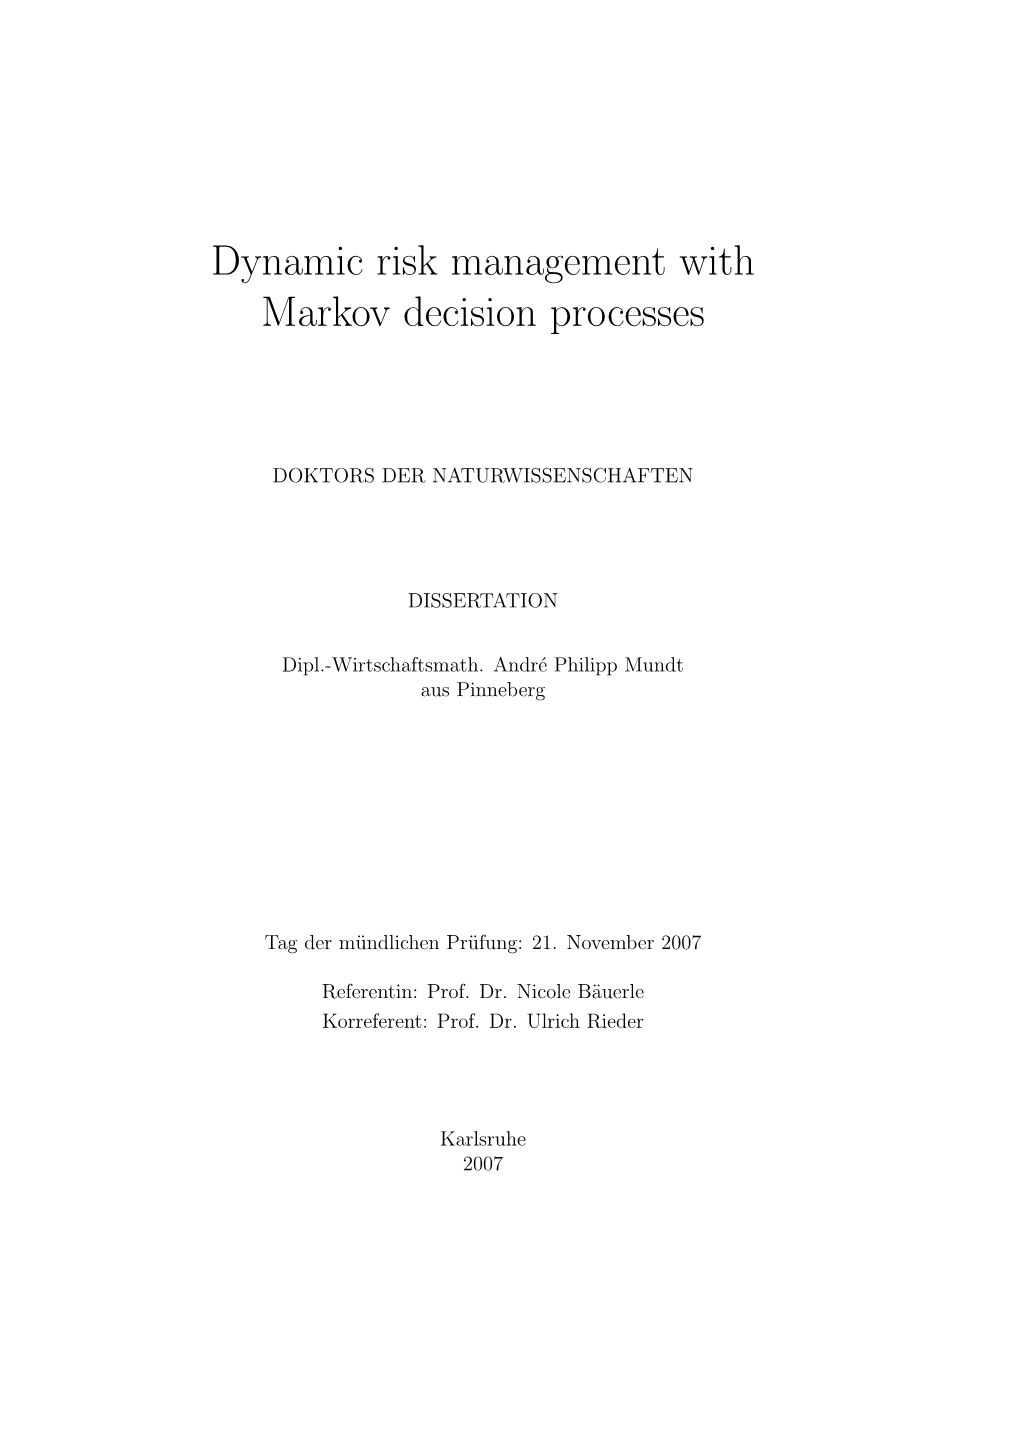 Dynamic Risk Management with Markov Decision Processes